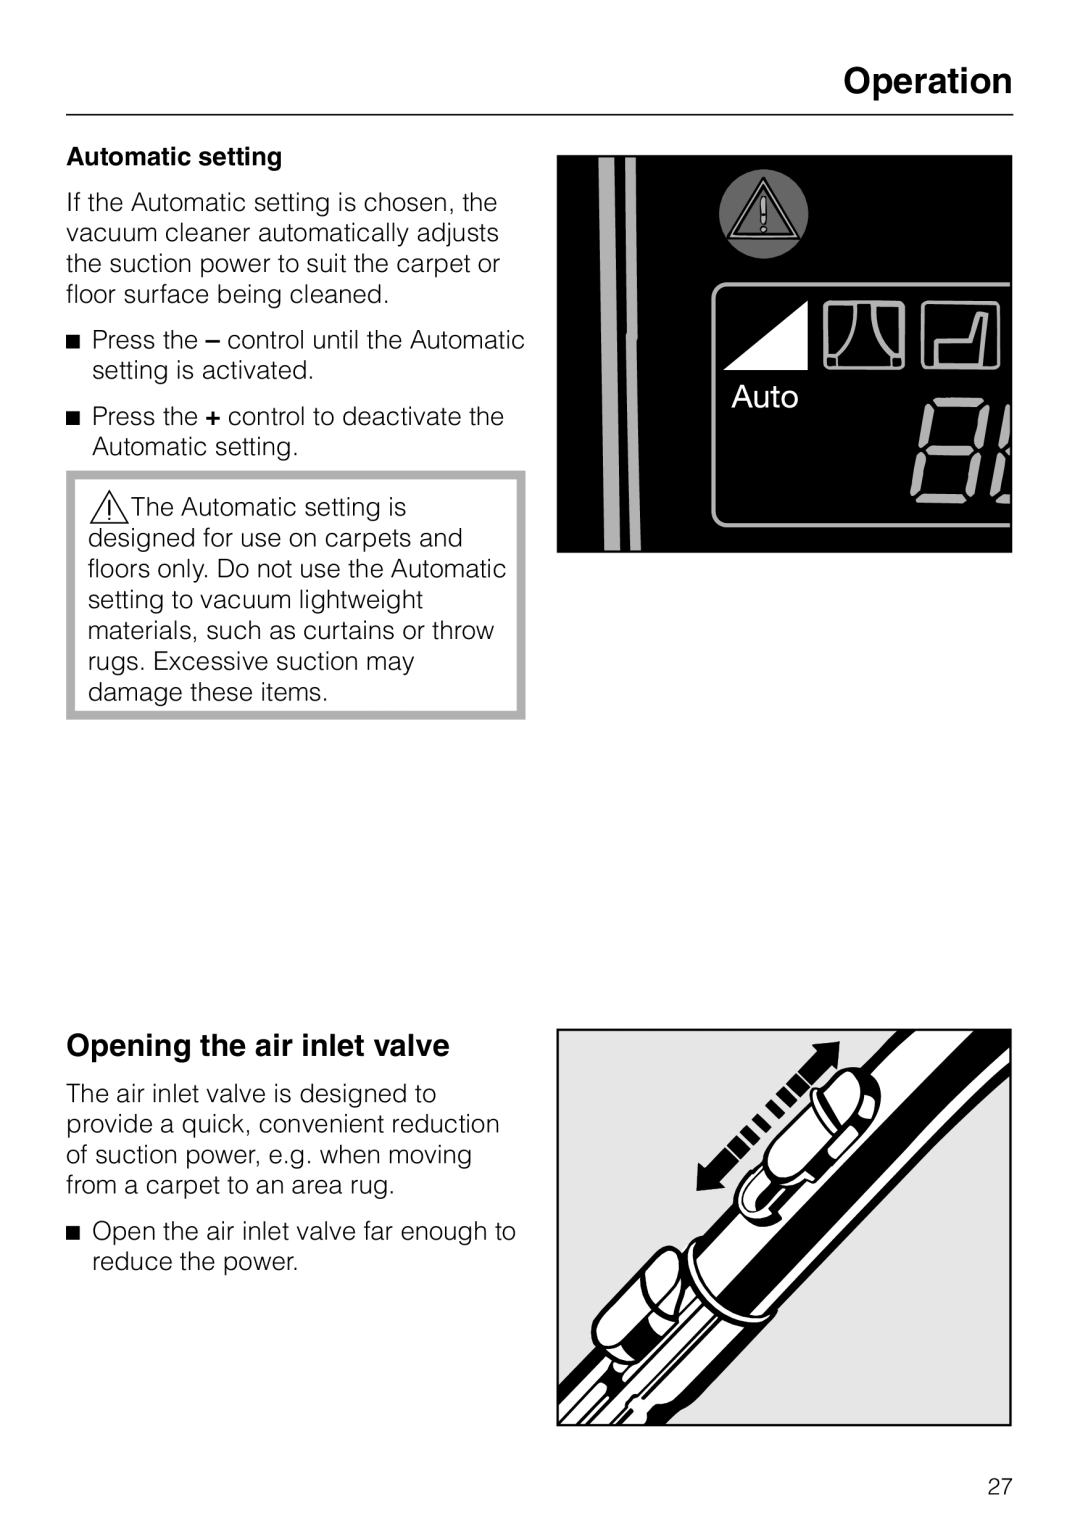 Miele S 500, S 600, S 648, S 548 operating instructions Operation, Opening the air inlet valve, Automatic setting 